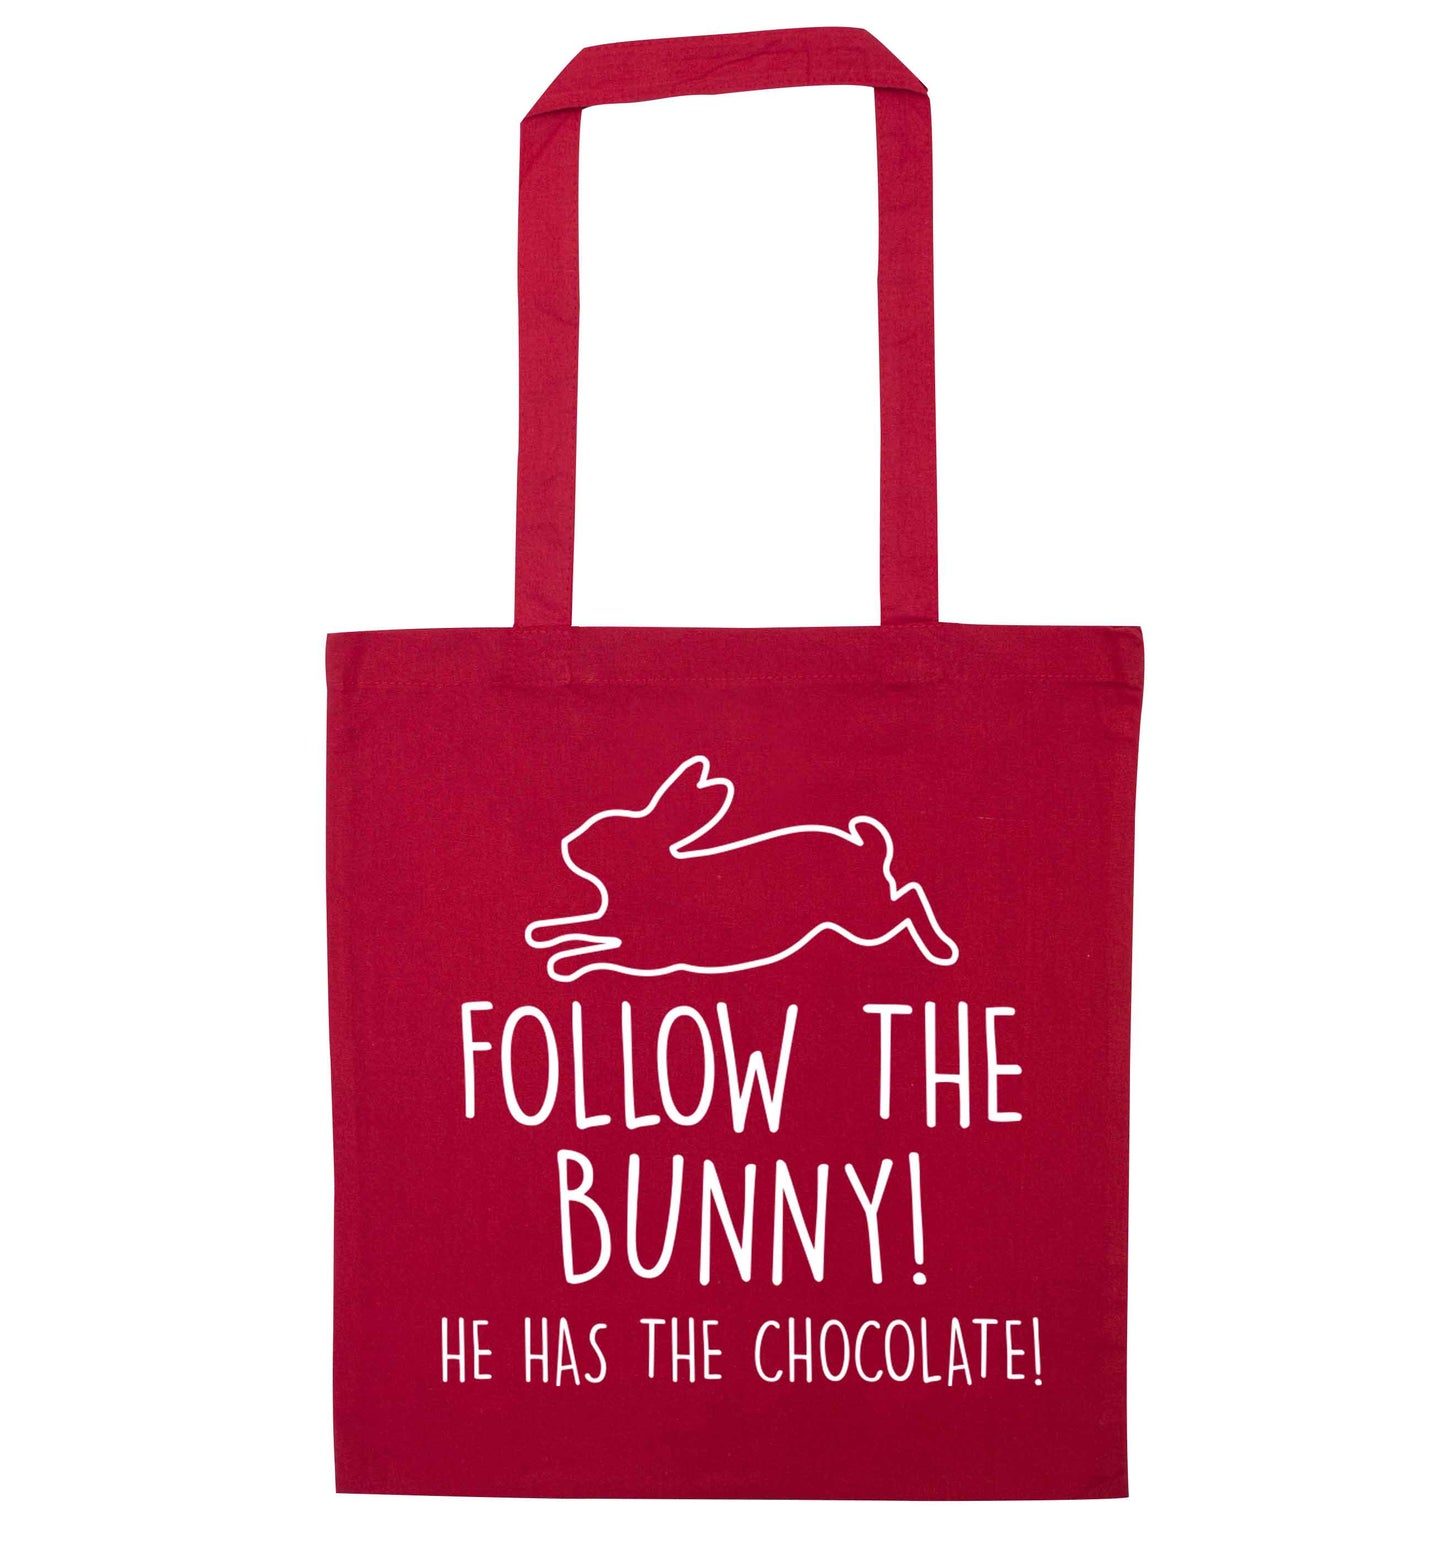 Follow the bunny! He has the chocolate red tote bag